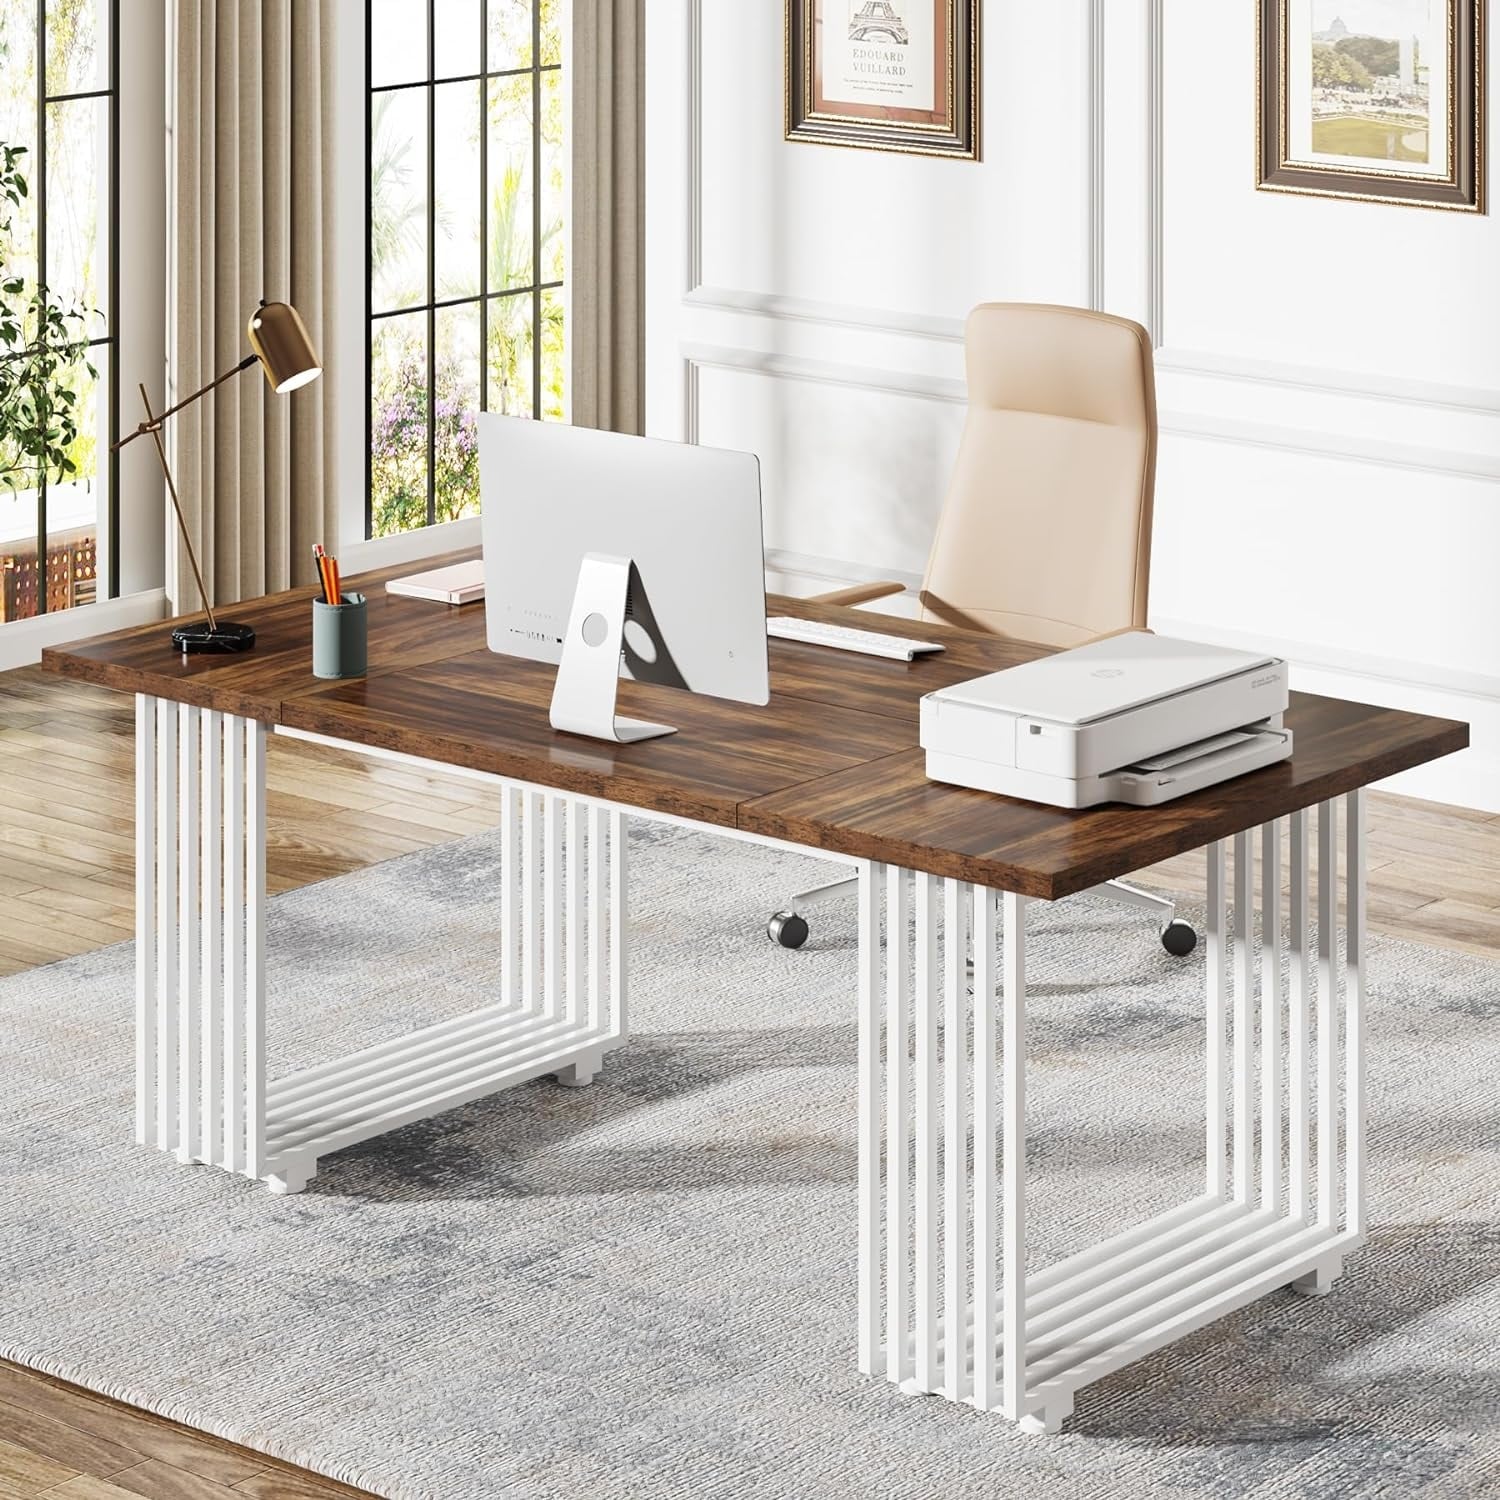 https://ak1.ostkcdn.com/images/products/is/images/direct/623cc284dd7a40bdb75e45ca036ded1645f2754c/70.9%22-Modern-Office-Desk%2C-White-Executive-Desk-with-Gold-Metal-Frame.jpg